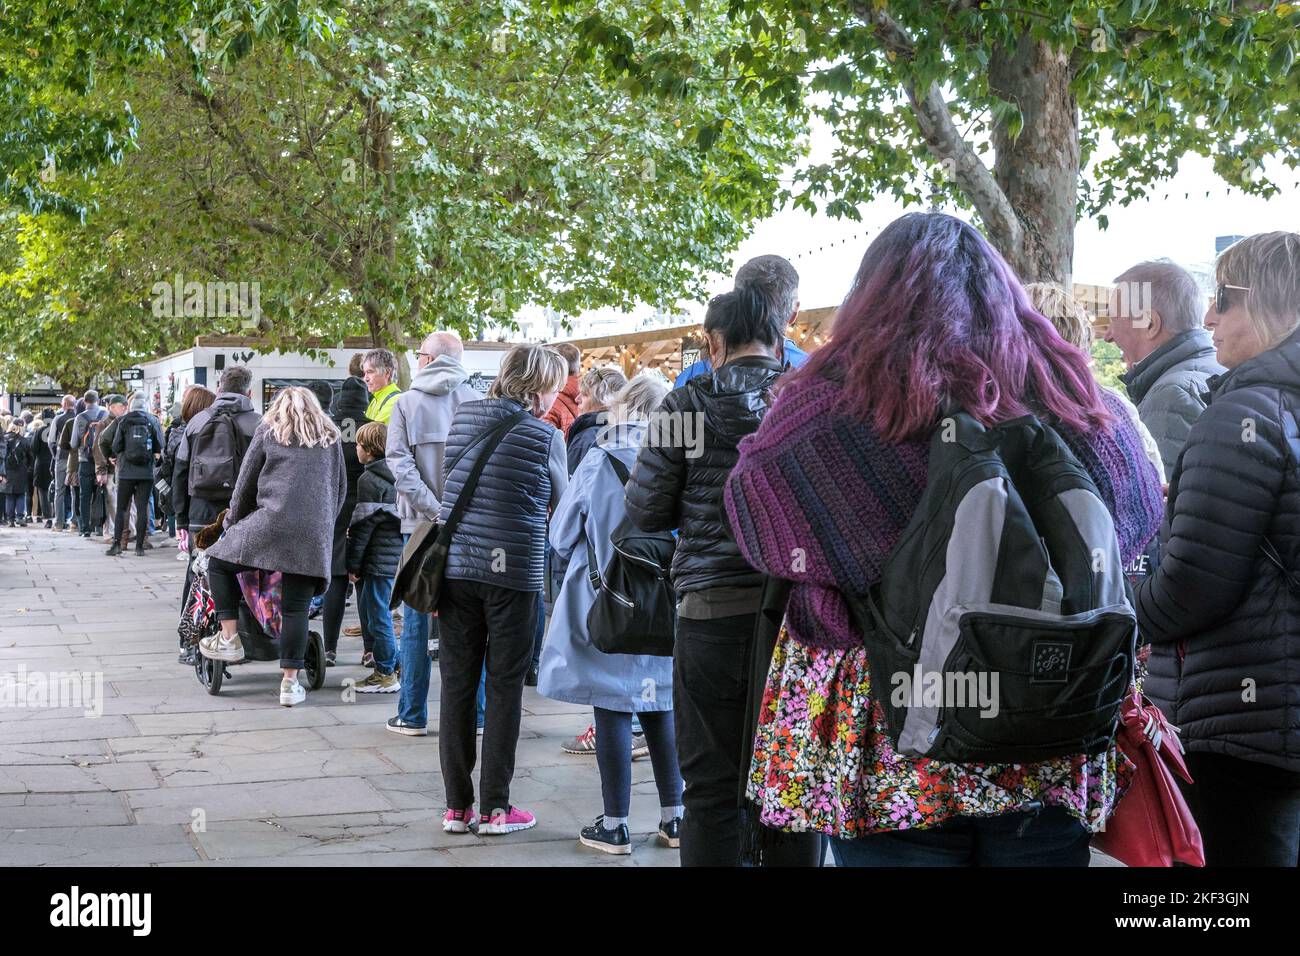 The queue at the South Bank in London to see Britain’s late Queen Elizabeth II lying in state. Stock Photo